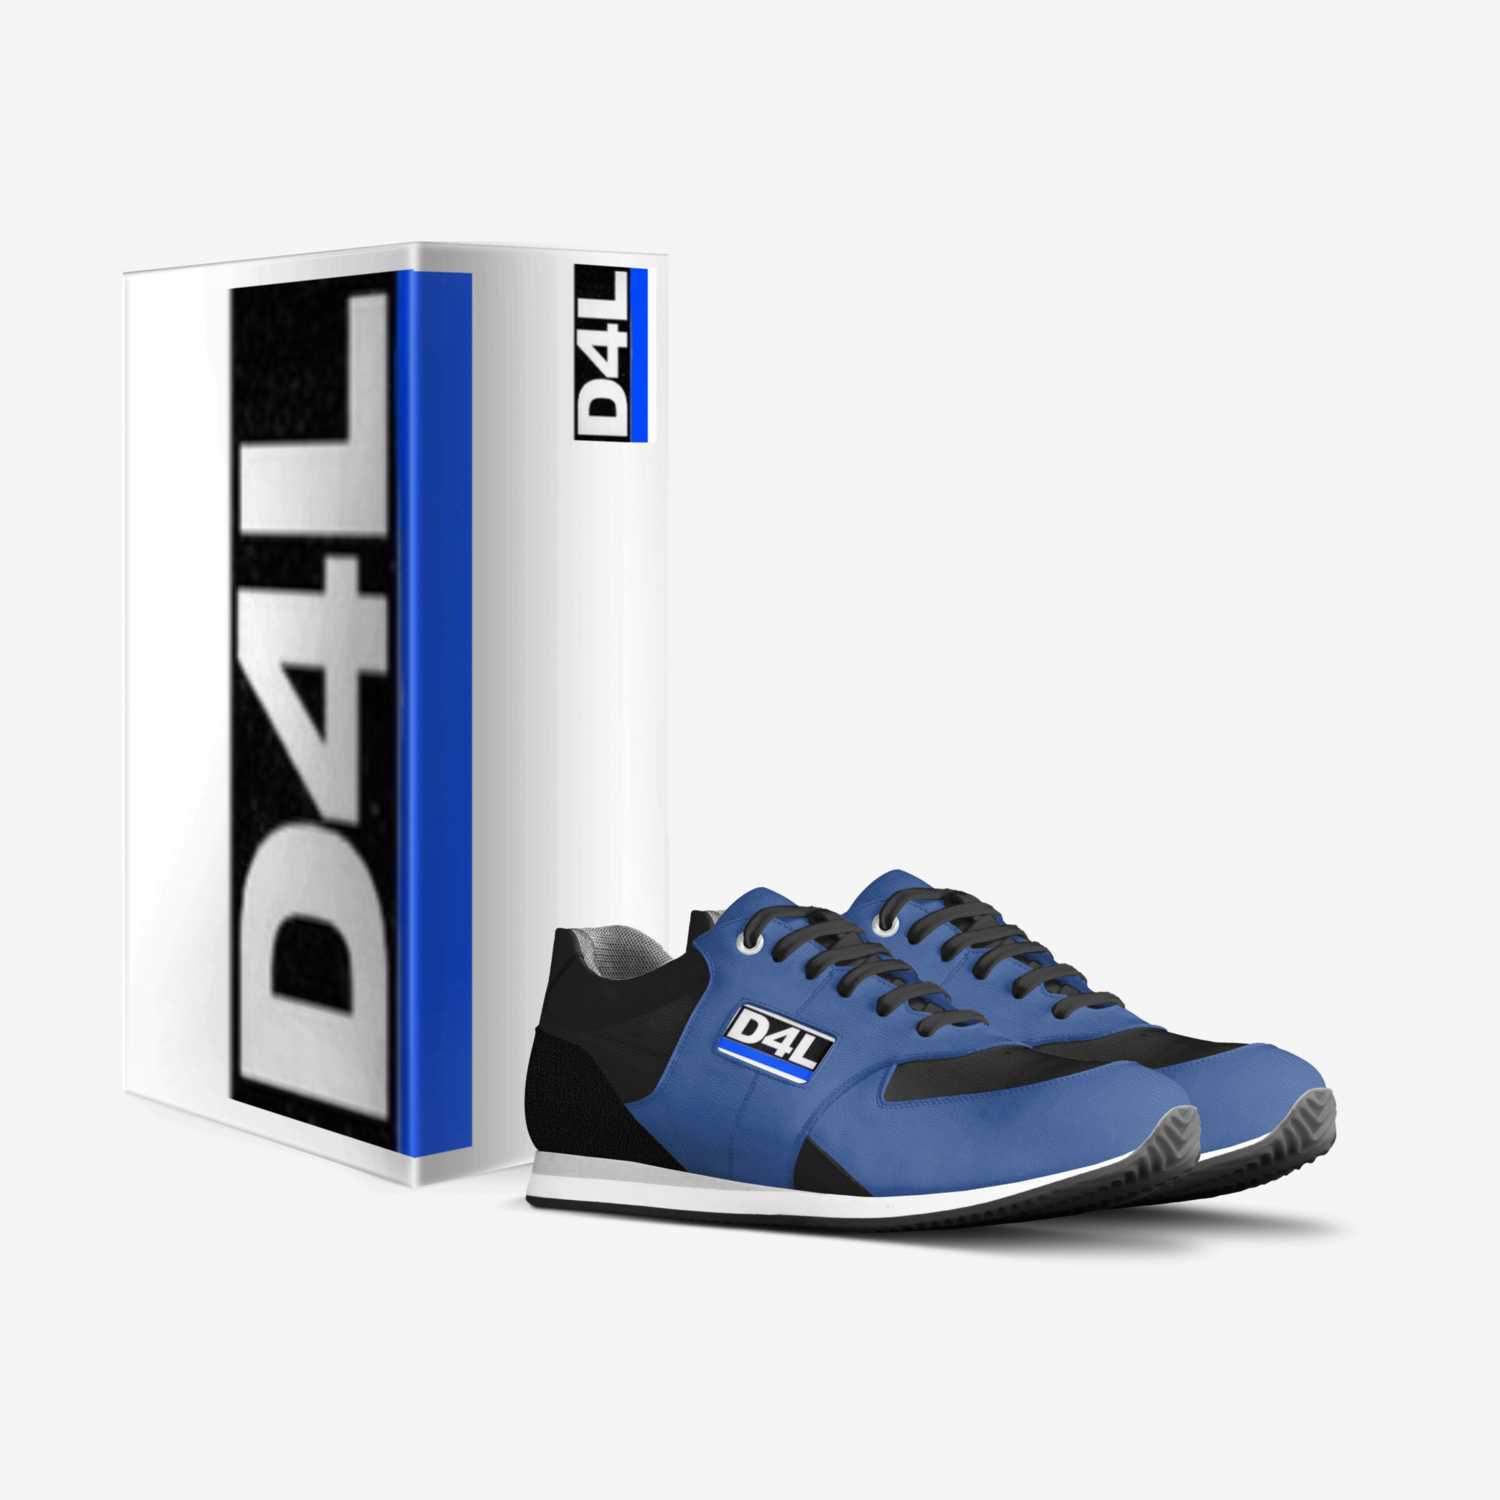 D4L custom made in Italy shoes by Shannon Lance | Box view